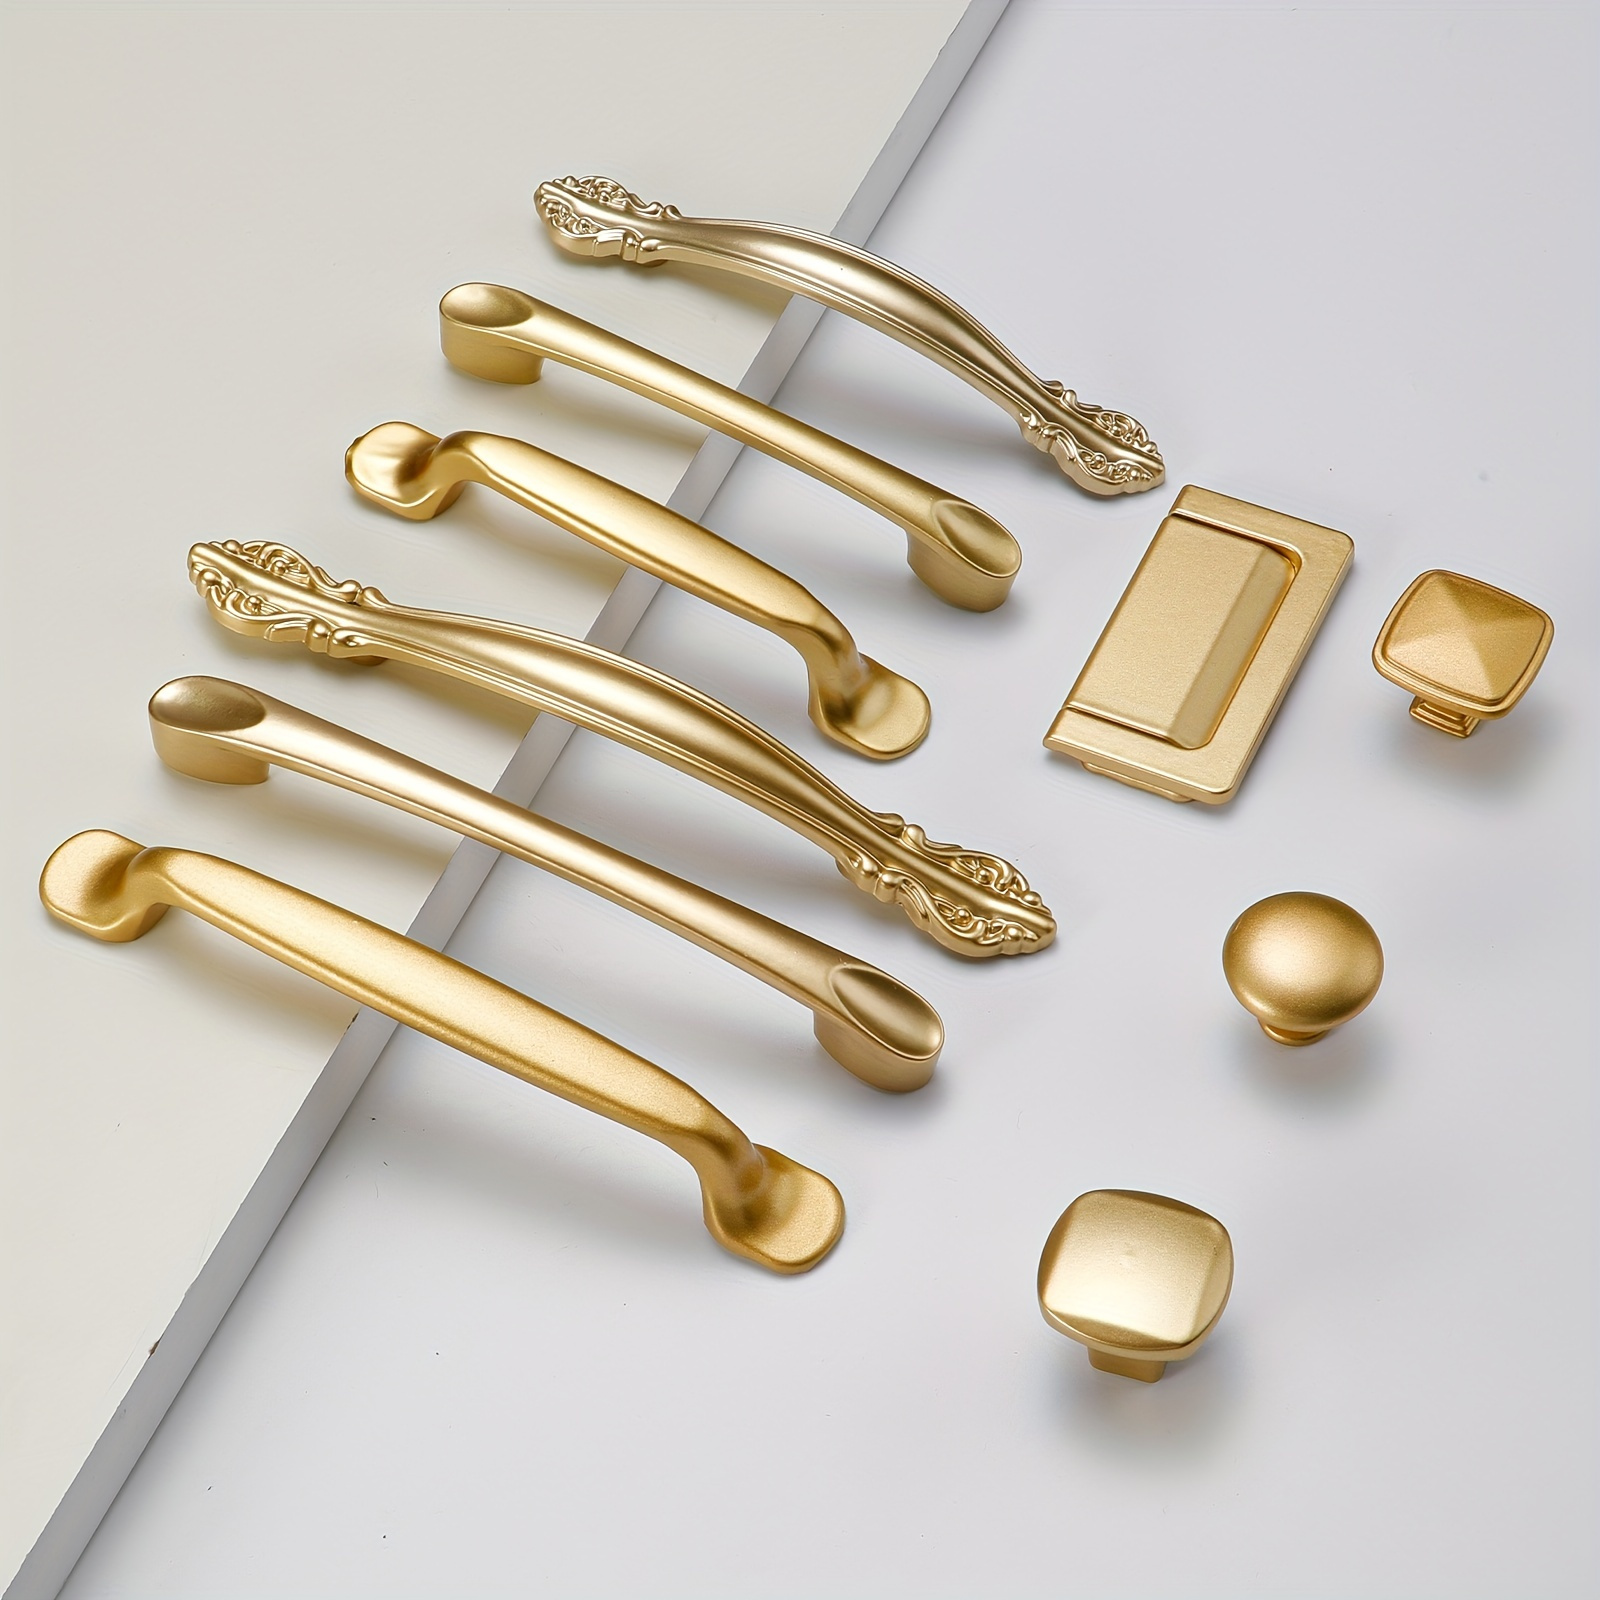 

Modern European Style Decorative Pull Handles - Perfect For Wardrobe Doors, Drawers & Cabinets!